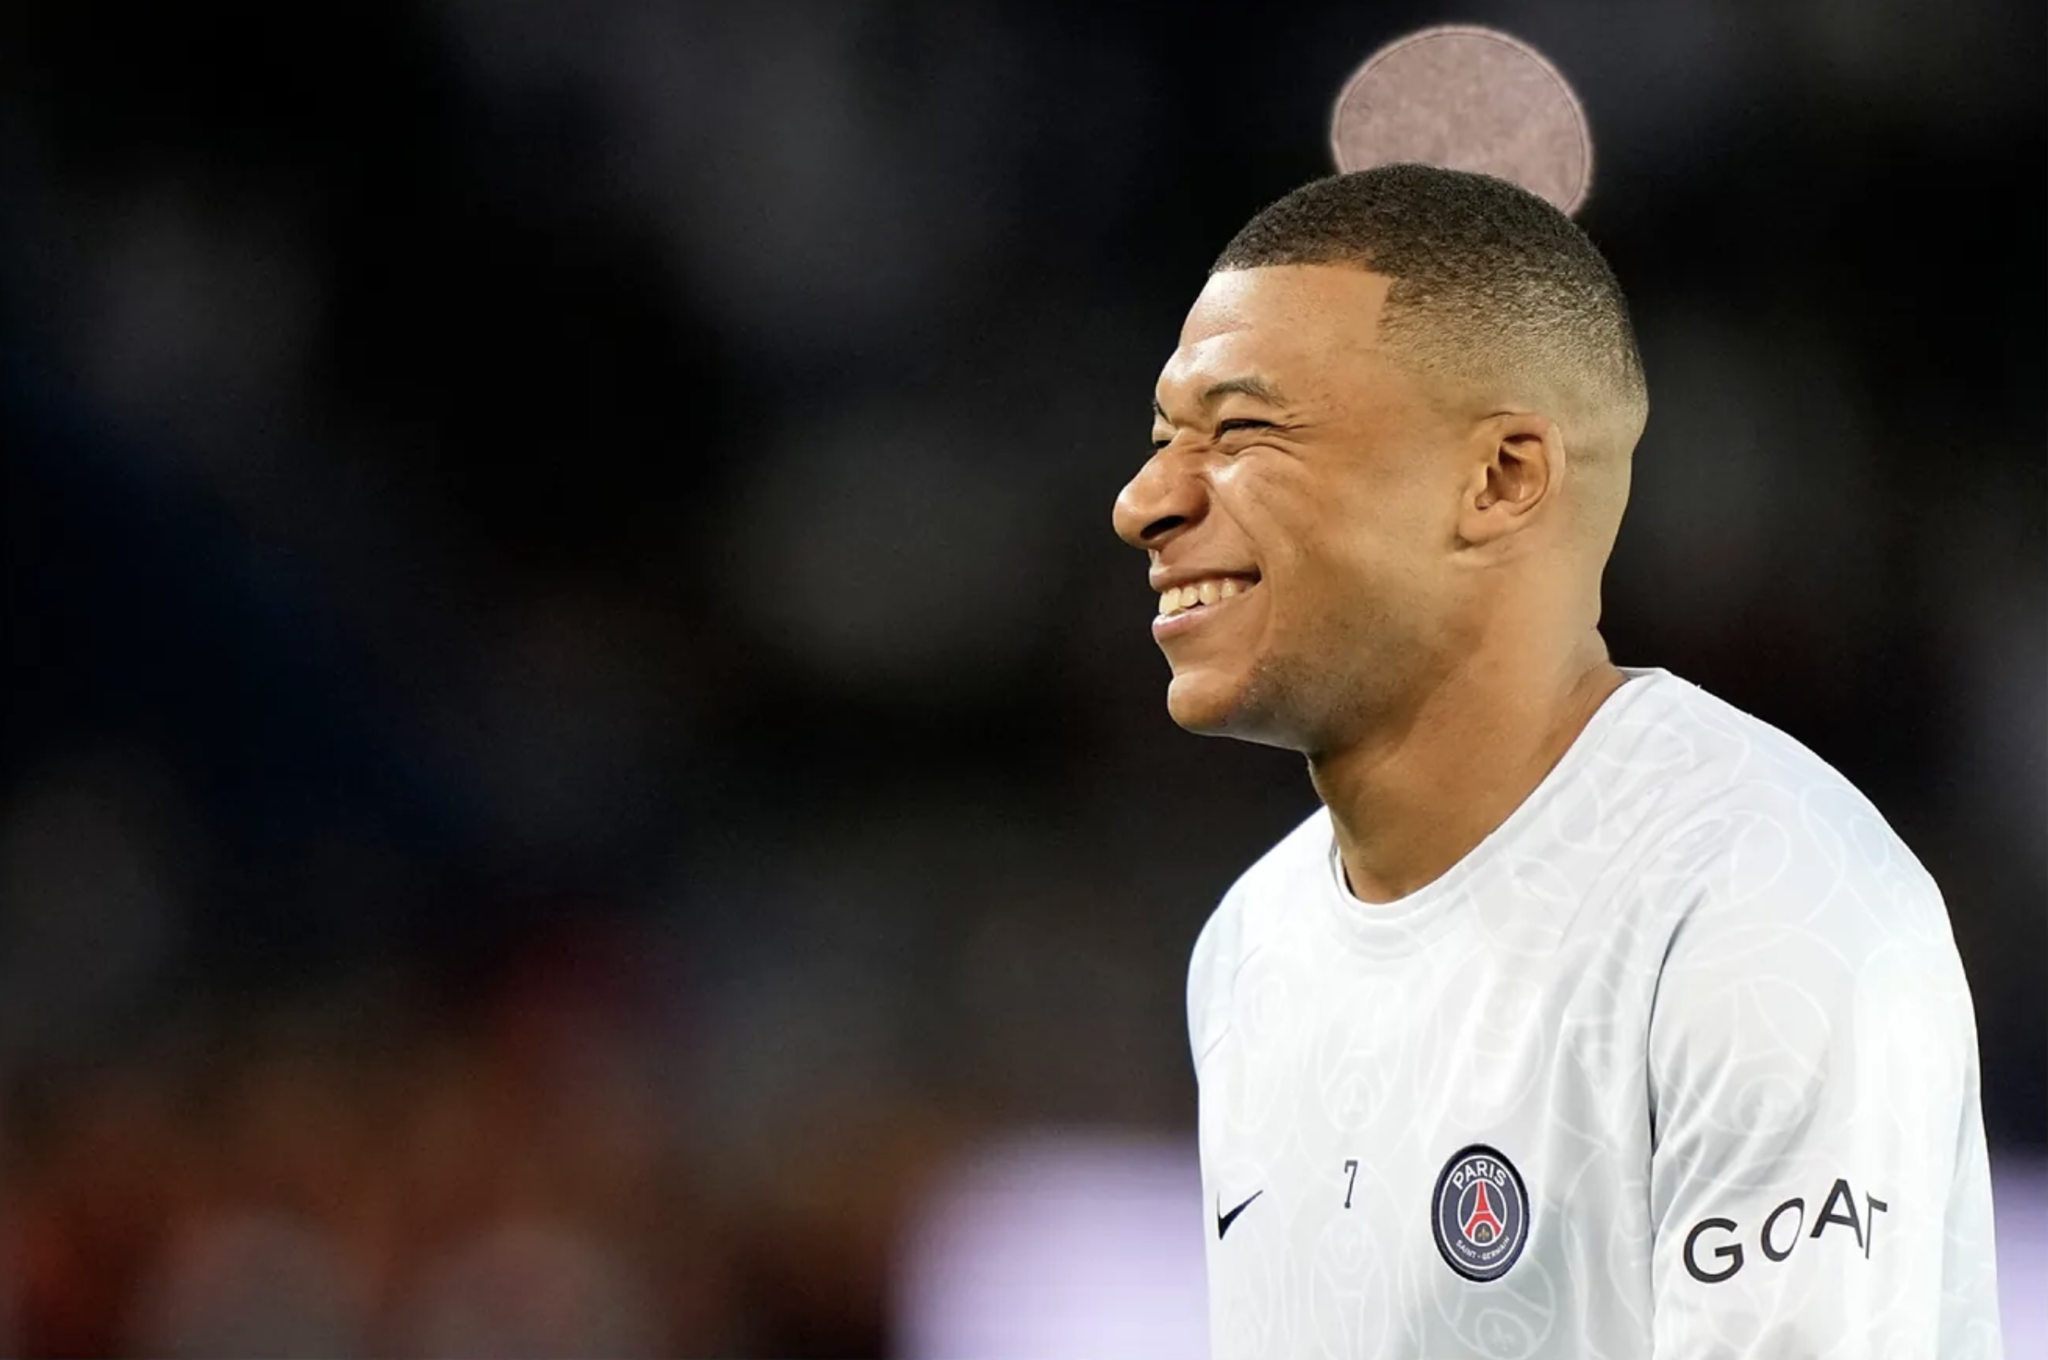 Kylian Mbappe and the kebab: PSG star takes legal action against influencer